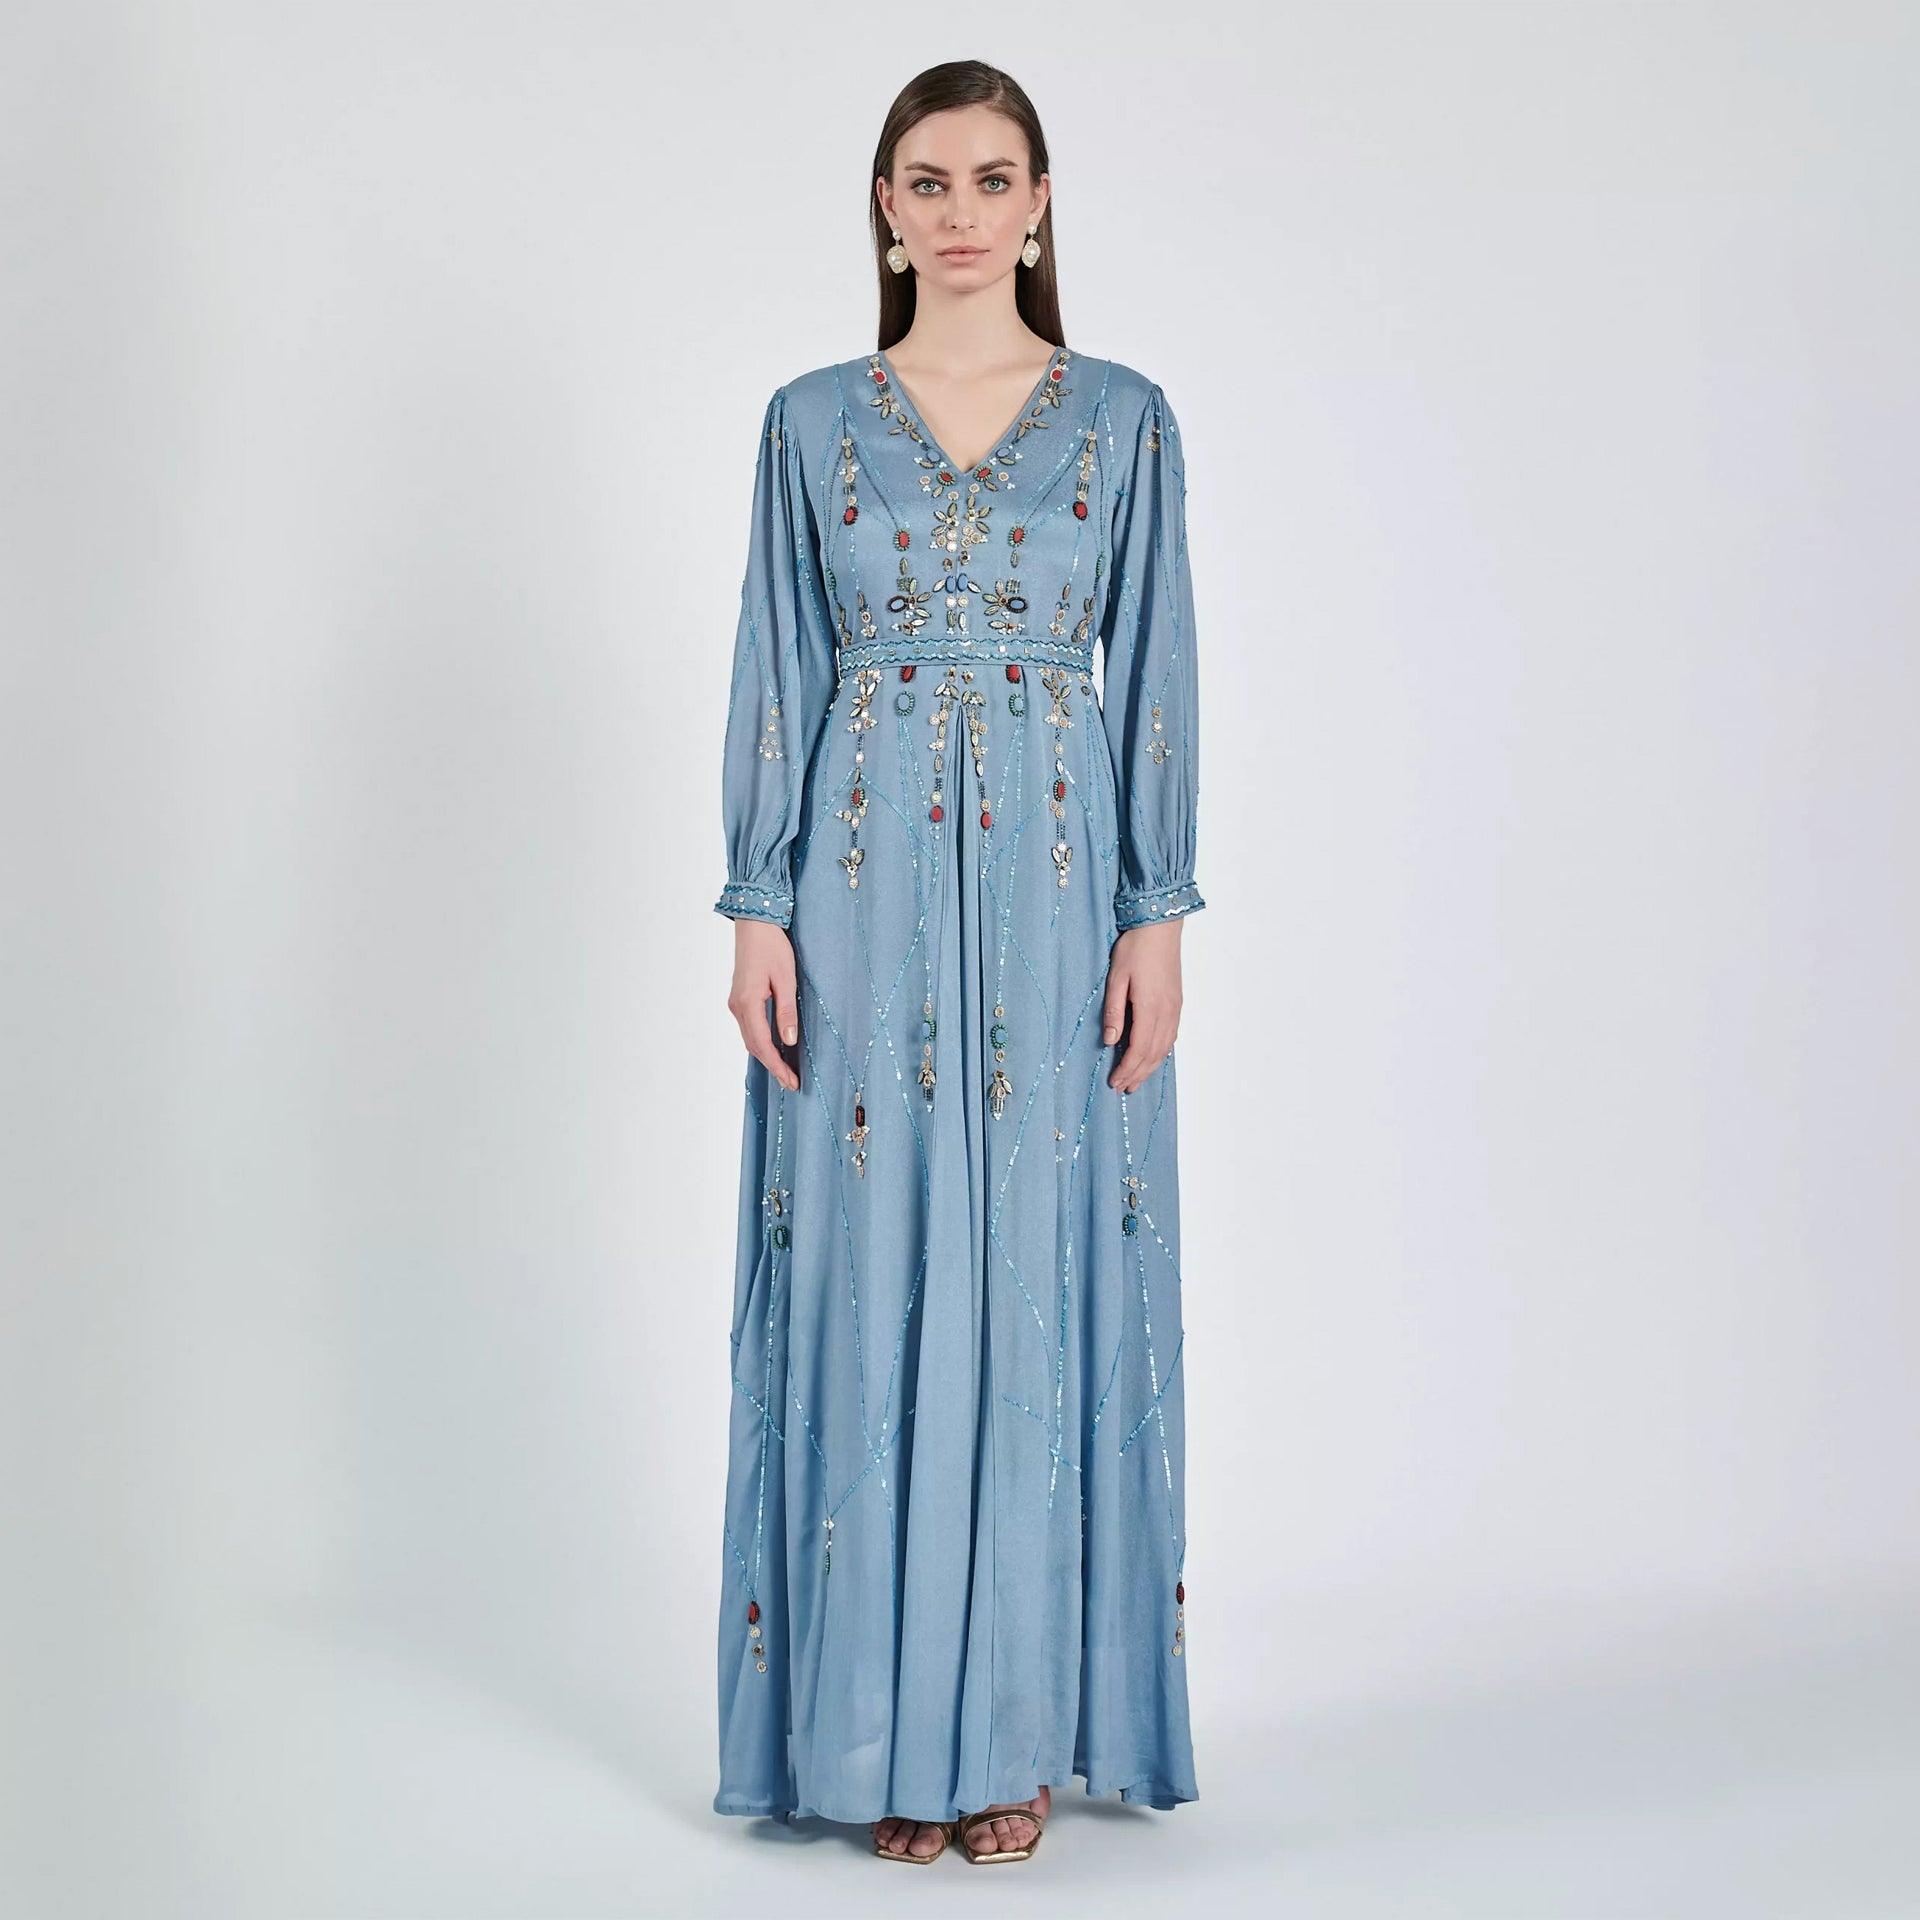 Sky Blue Crepe Dalin Dress with Long Sleeves - WECRE8